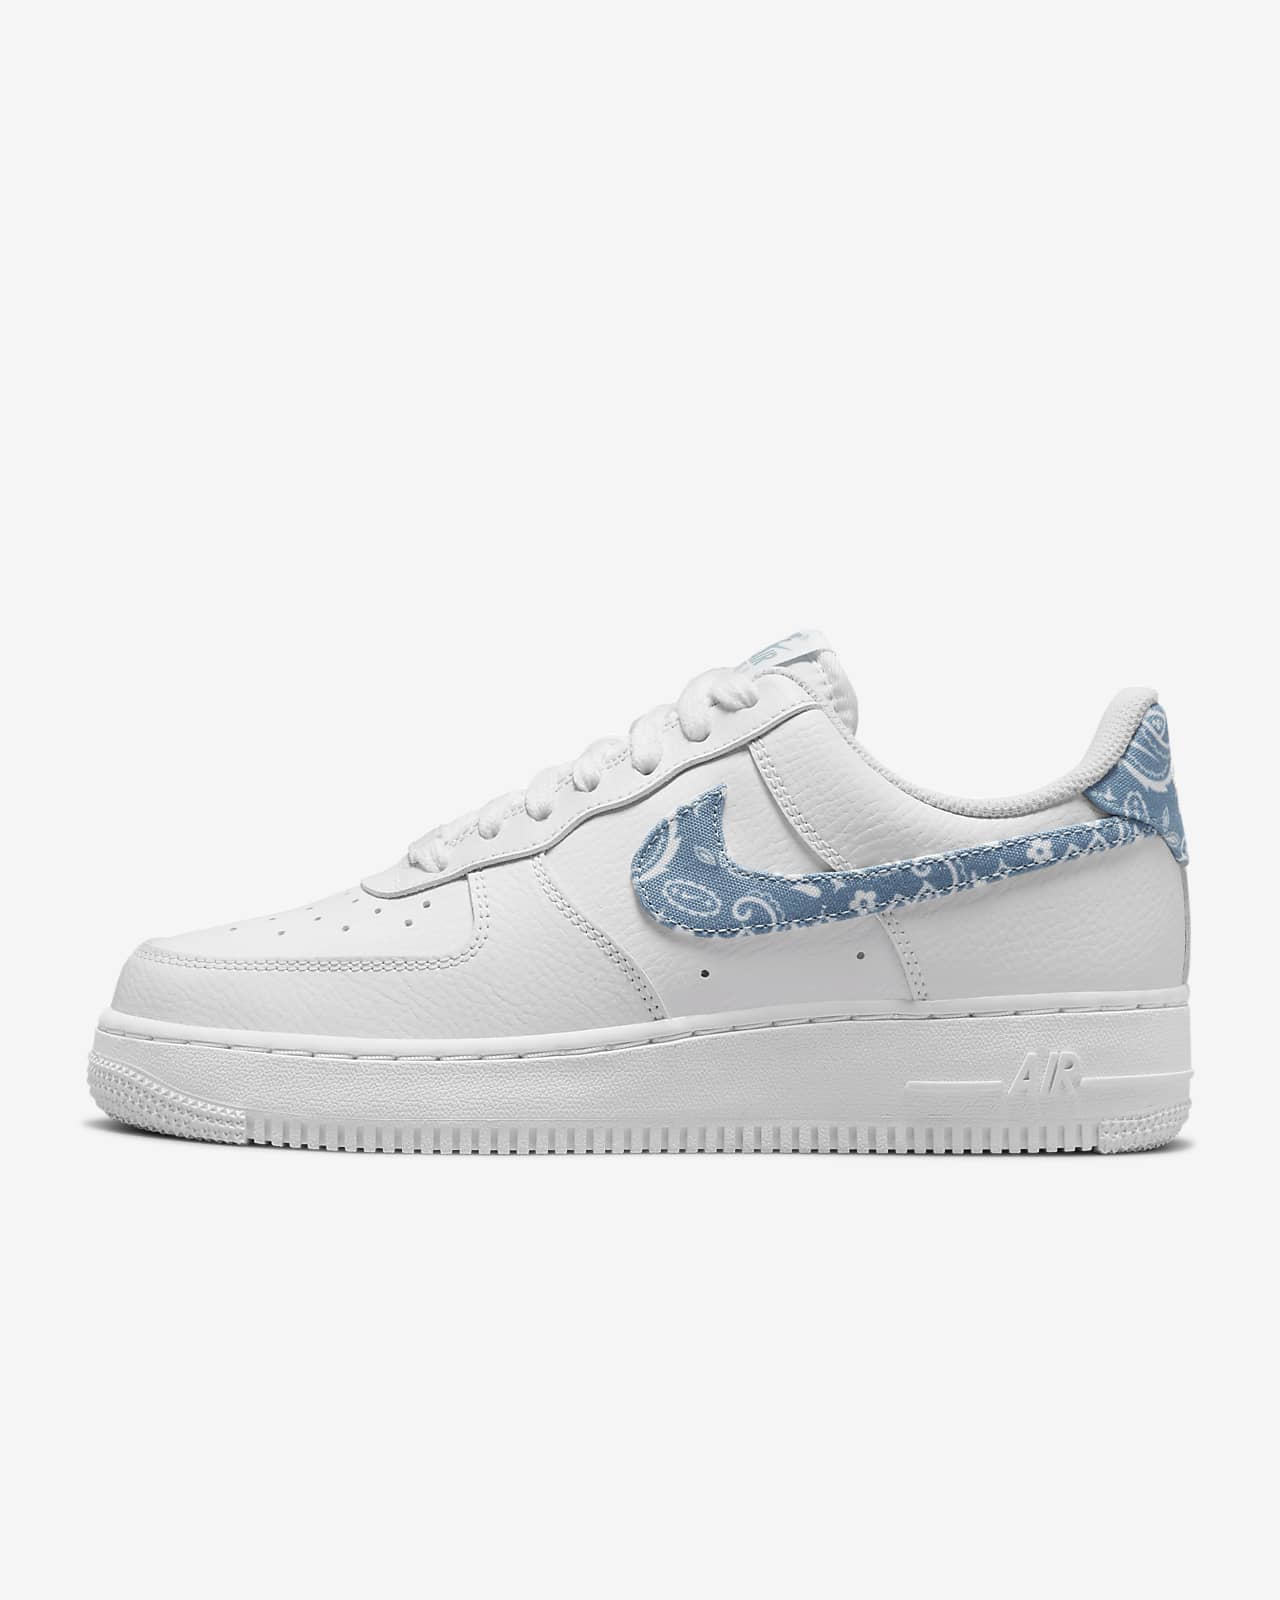 Scarpa Nike Air Force 1 '07 Essential - Donna. Nike IT كريم يوكو الاصلي